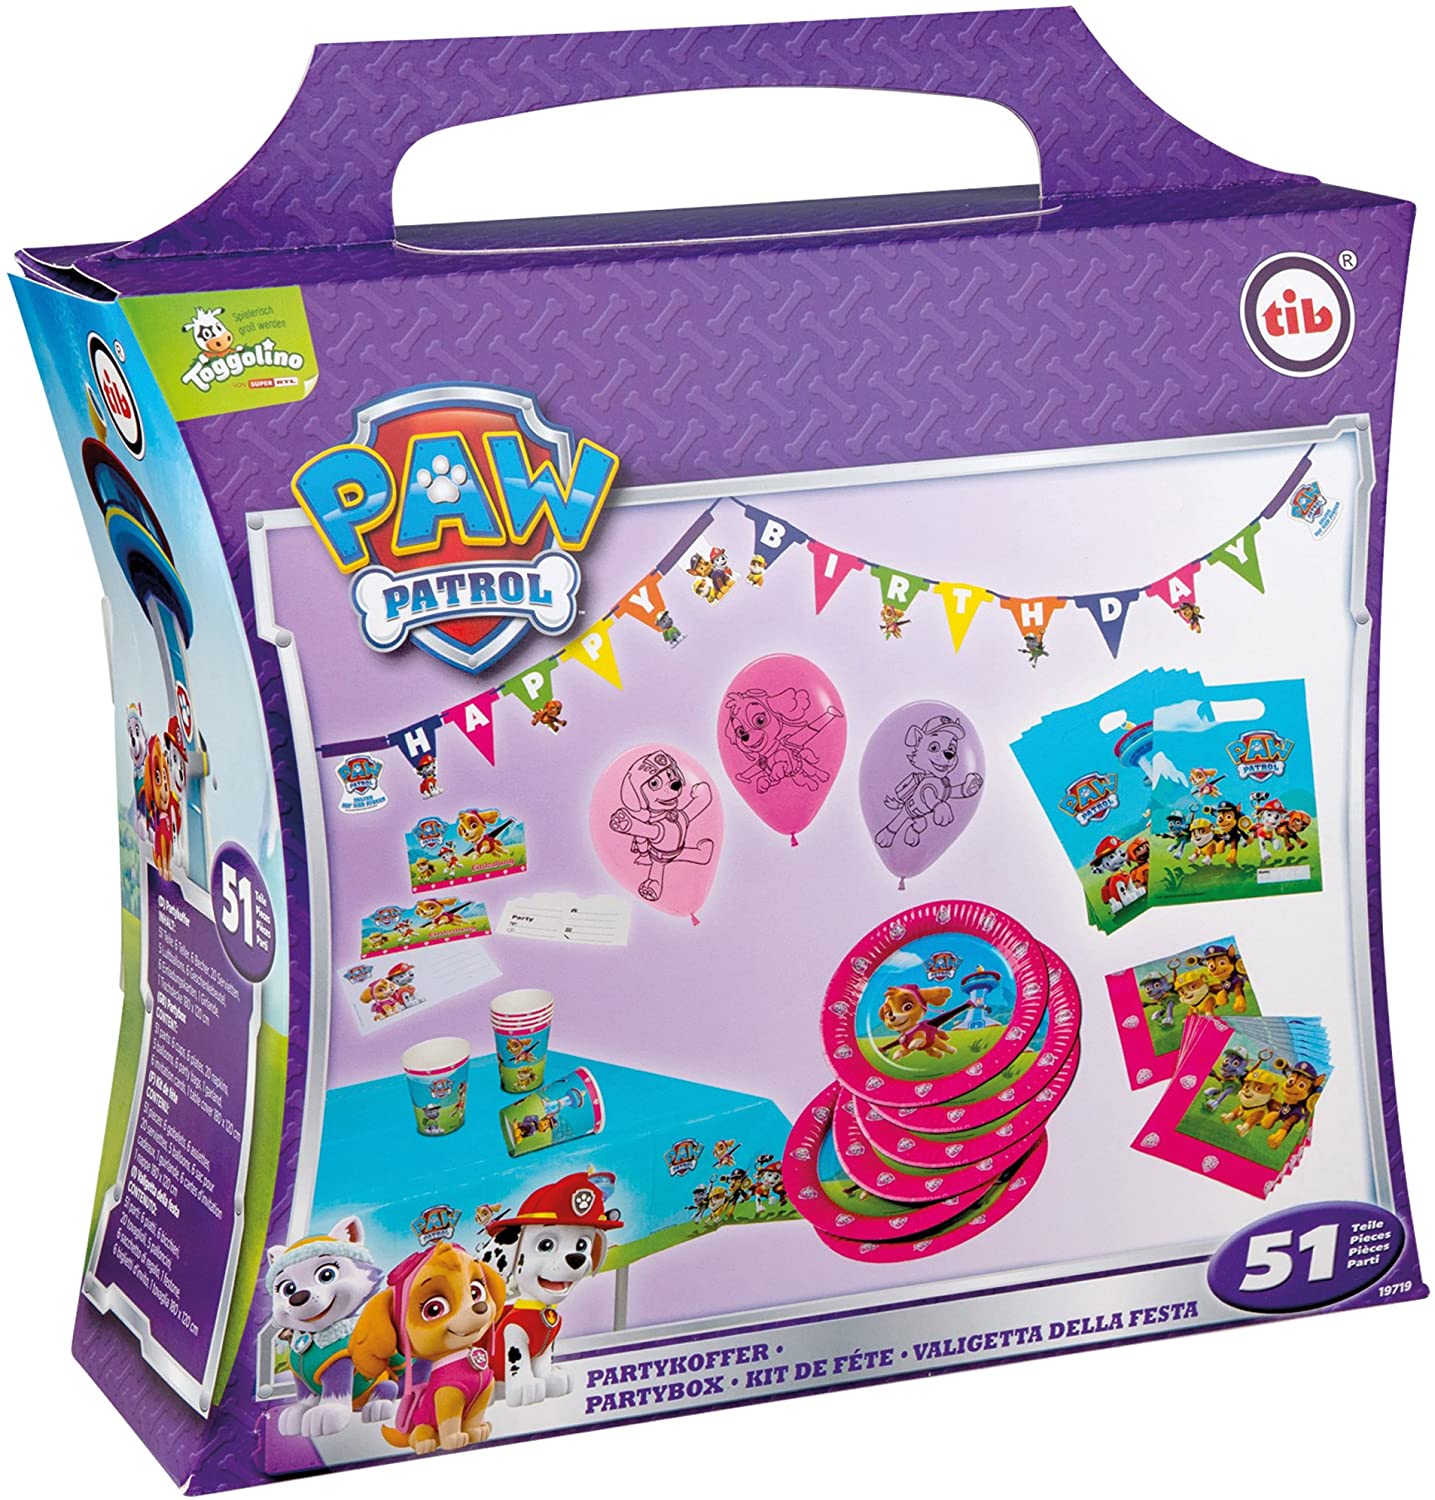 tib 10118779 Paw Patrol Girl Party Suitcase Set of 51 Pieces